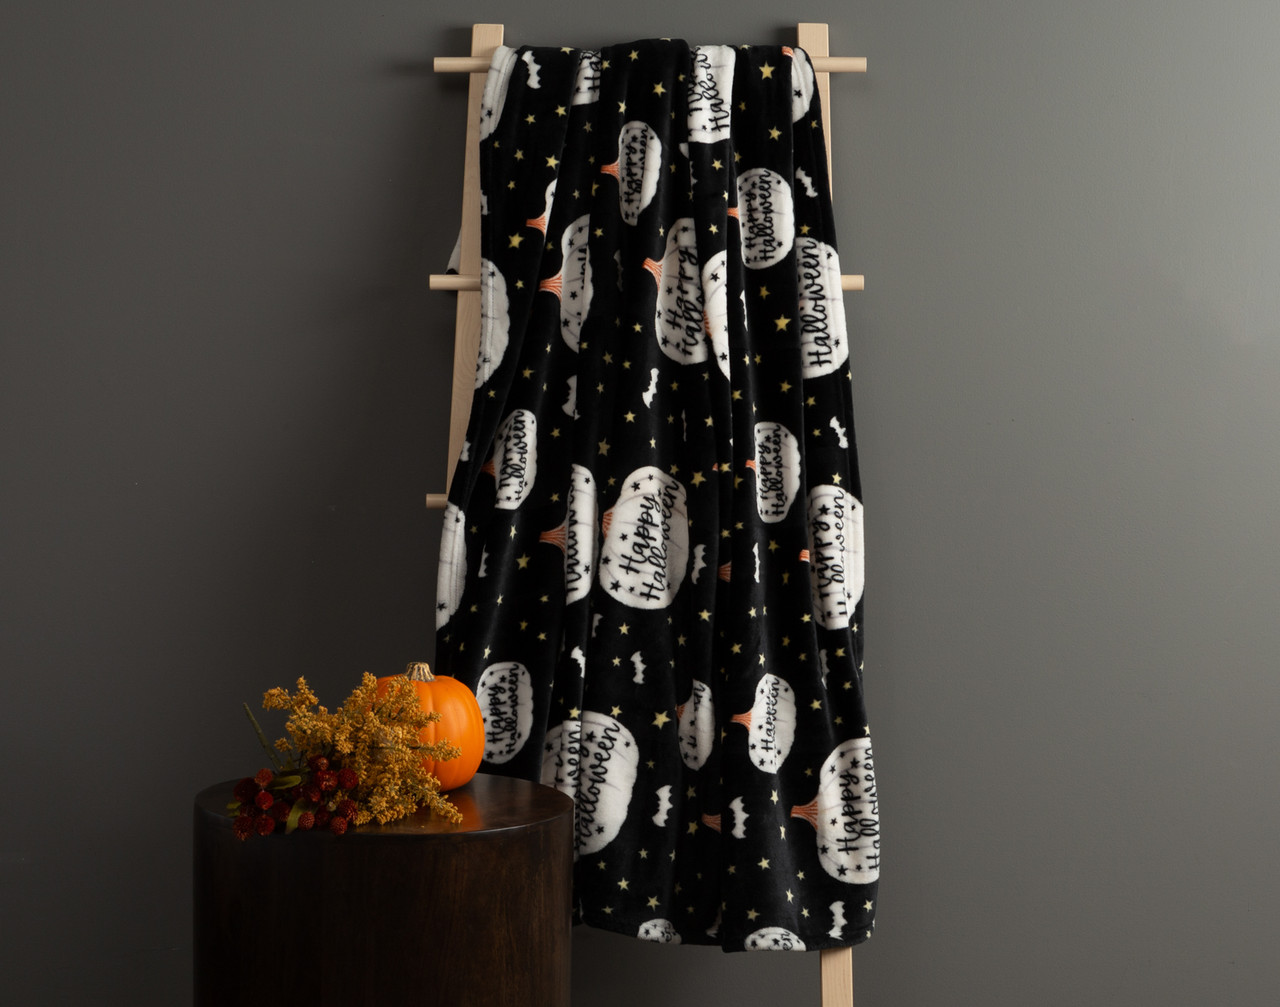 Our Happy Halloween Fleece Throw hanging from a ladder in a dark room, beside a small table with a pumpkin.